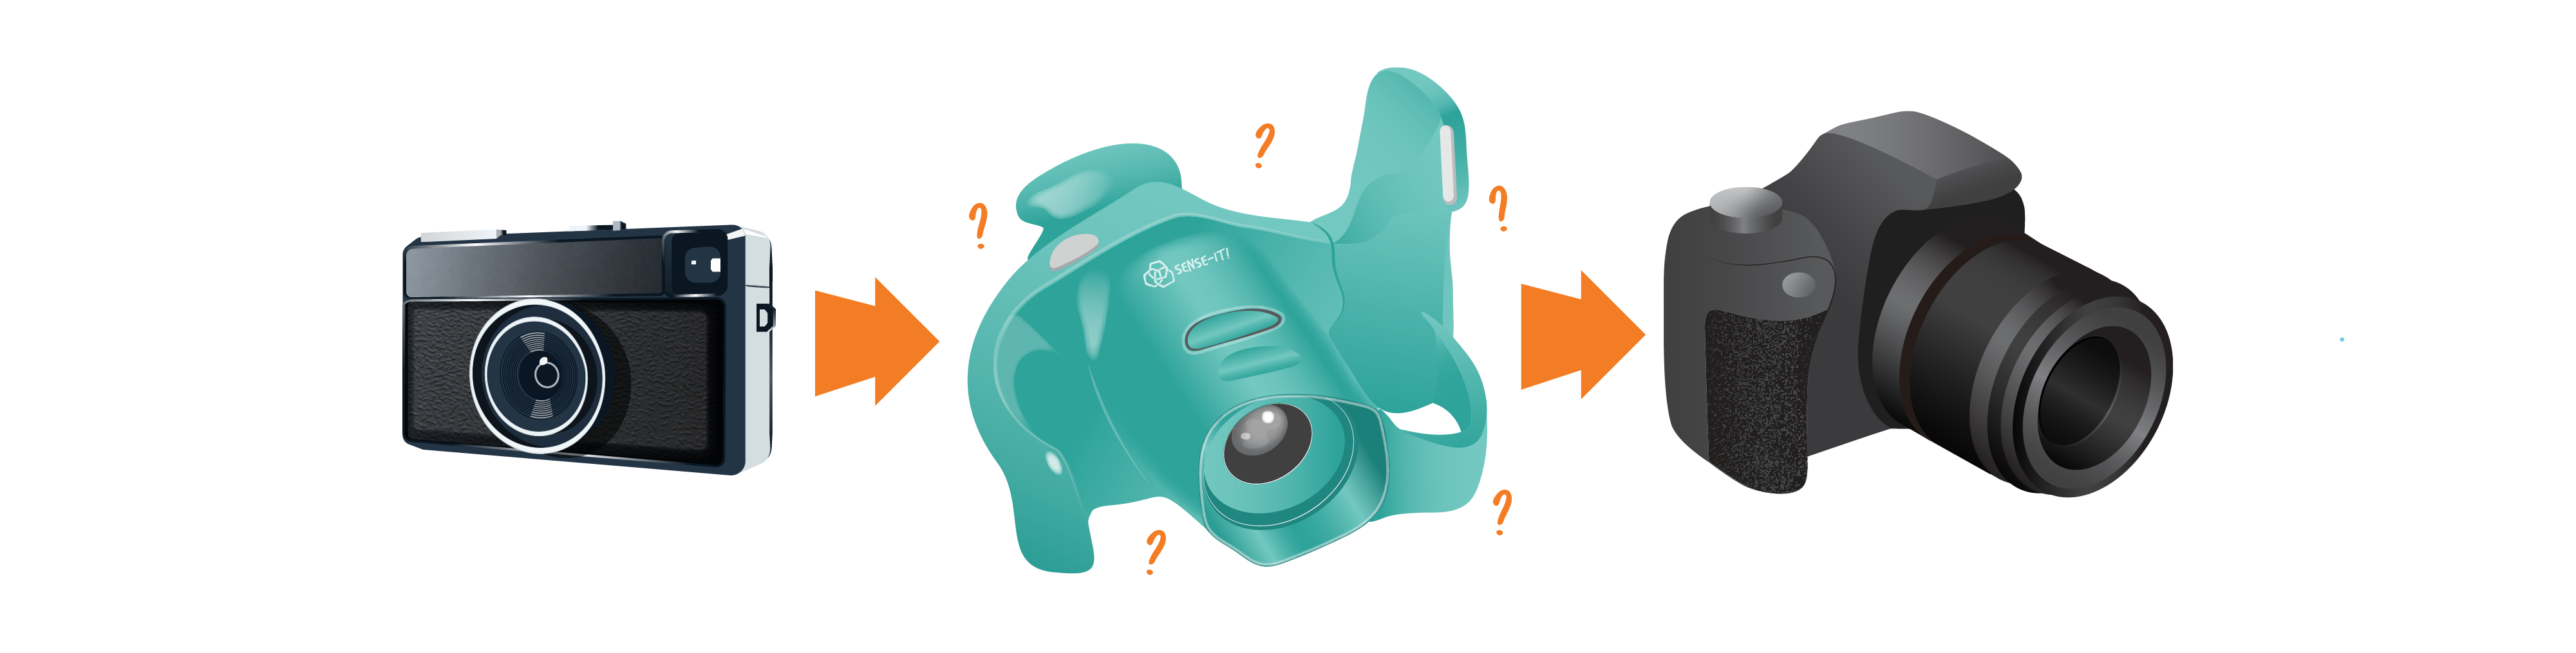 Three images of different types of cameras. First is a thin, black, modern digital camera. An orange arrow points to the second camera. This camera is teal and made of plastic with many places to grasp it and hold it. An orange arrow points to the third camera. A black DSLR camera.